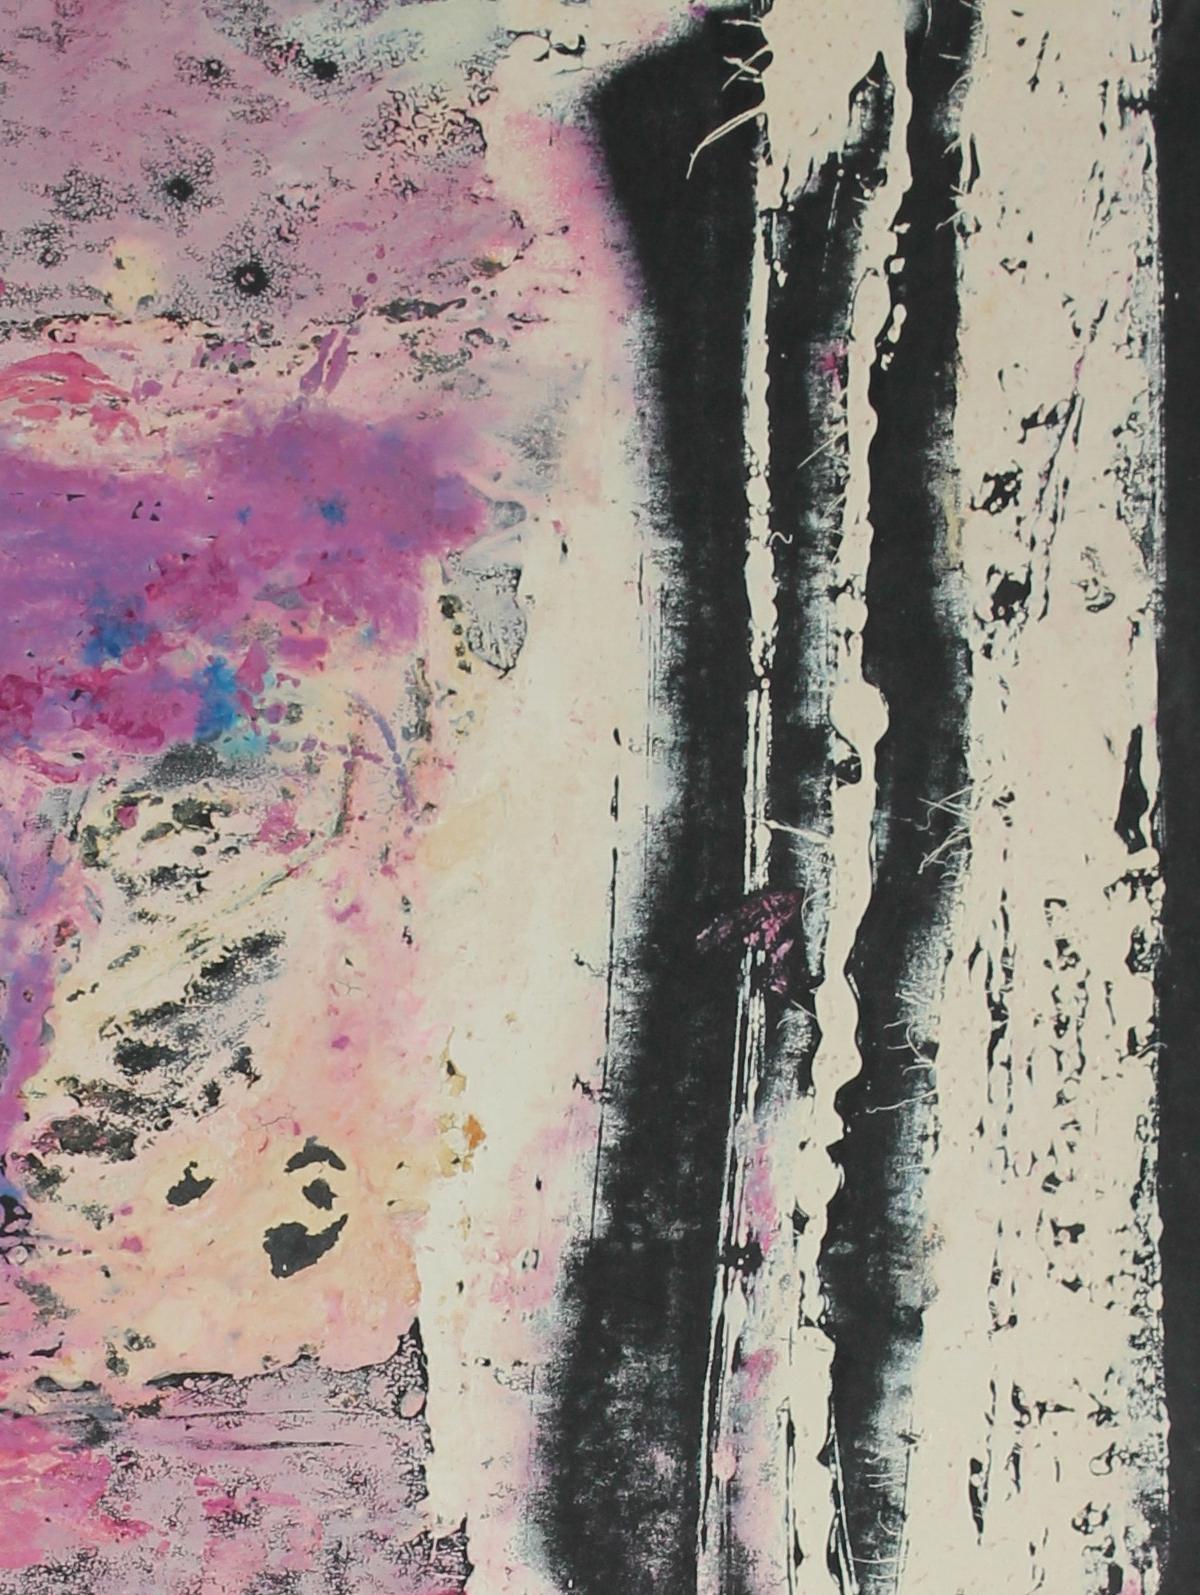 Bright Abstract Dye Transfer Print on Paper in Pink Red Purple Black and Gray  - Painting by Seymour Tubis